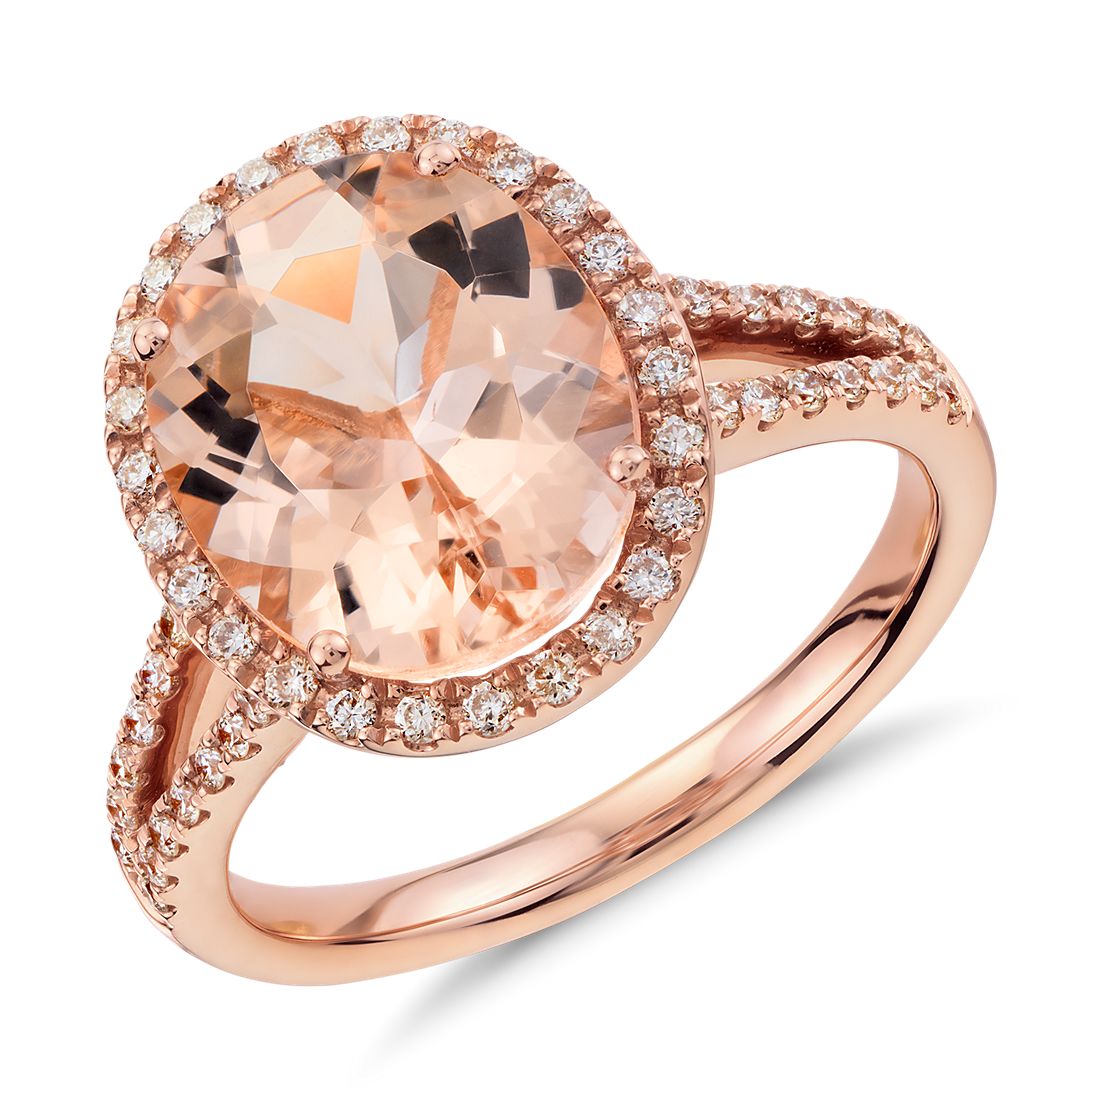 Morganite and Diamond Halo Ring in 14k Rose Gold (11x9mm)